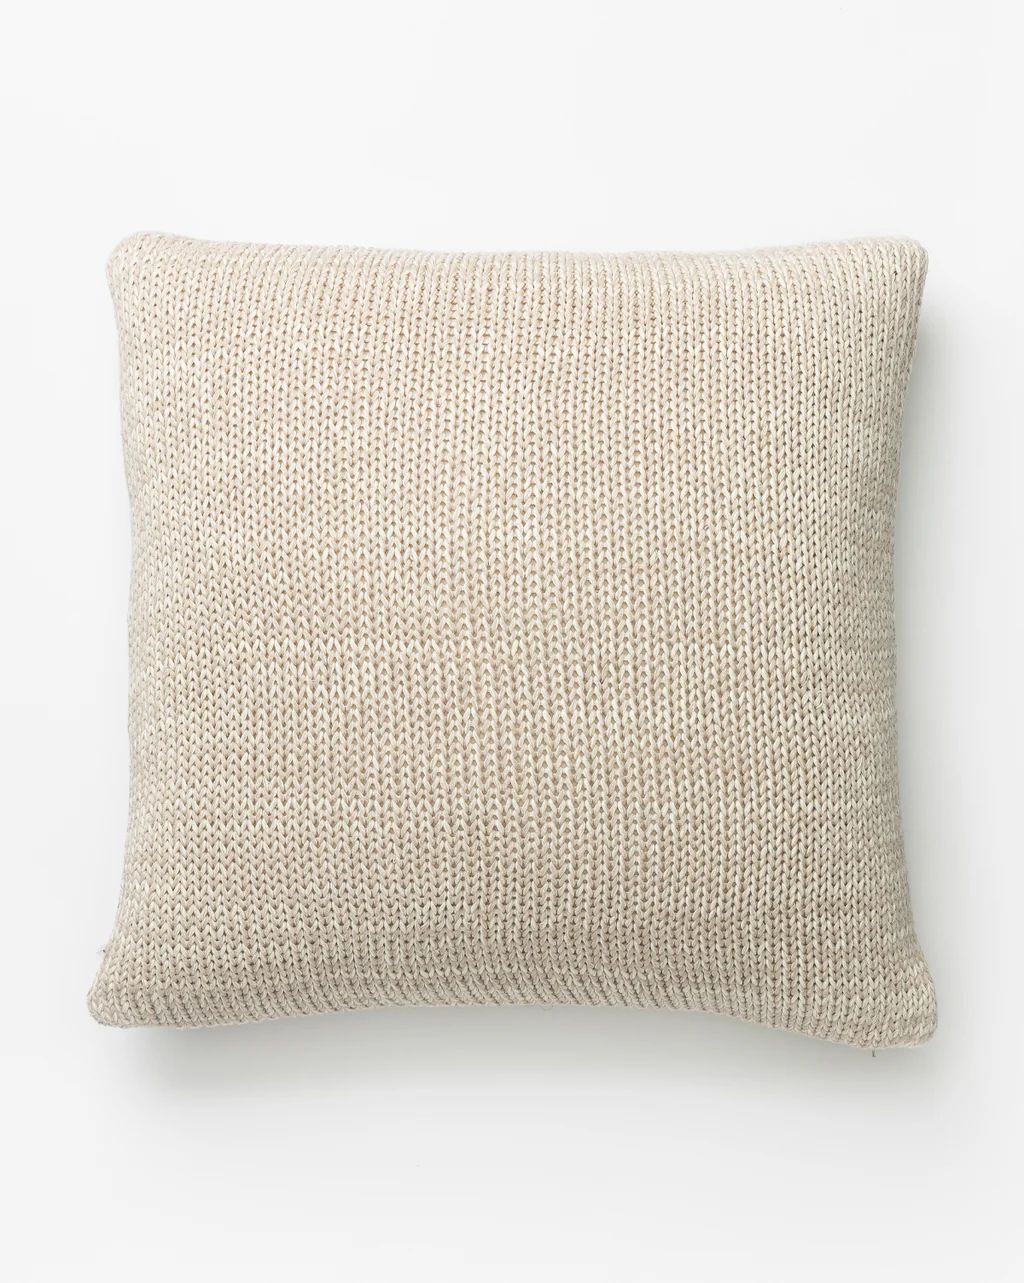 Libbey Knitted Cotton Pillow Cover | McGee & Co.